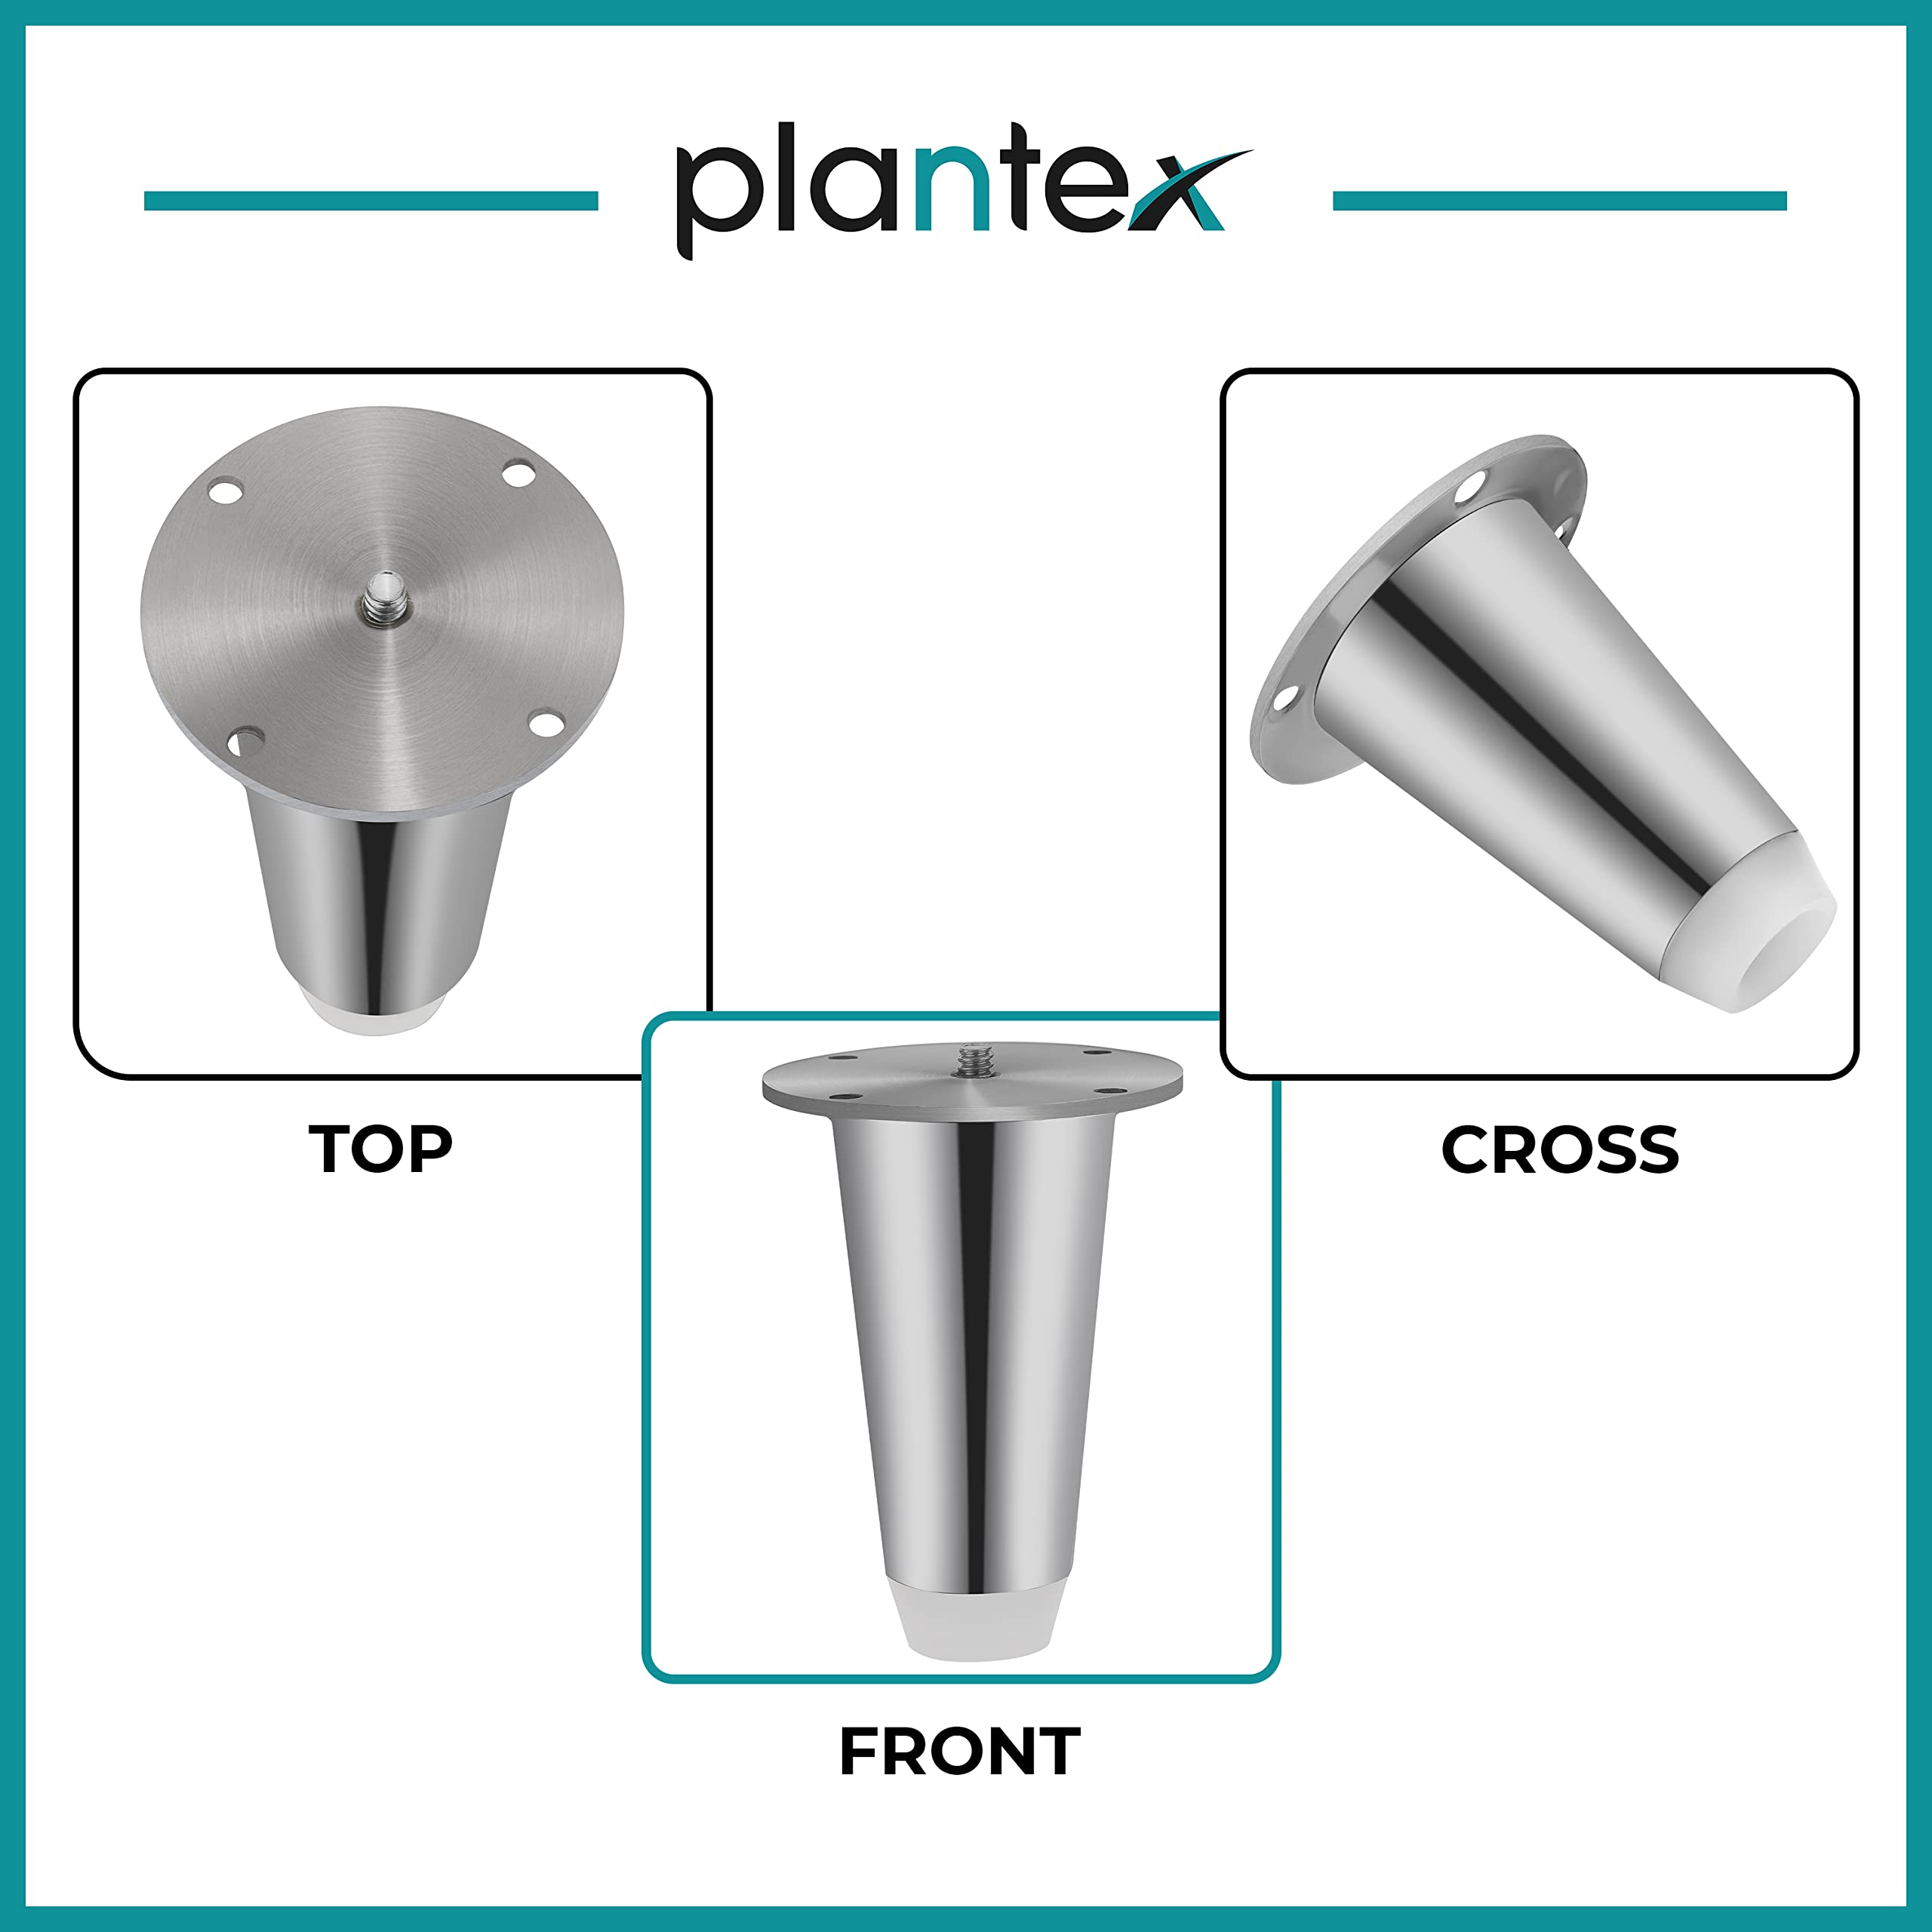 Plantex Heavy Duty Stainless Steel 4 inch Sofa Leg/Bed Furniture Leg Pair for Home Furnitures (DTS-53, Chrome) – 2 Pcs